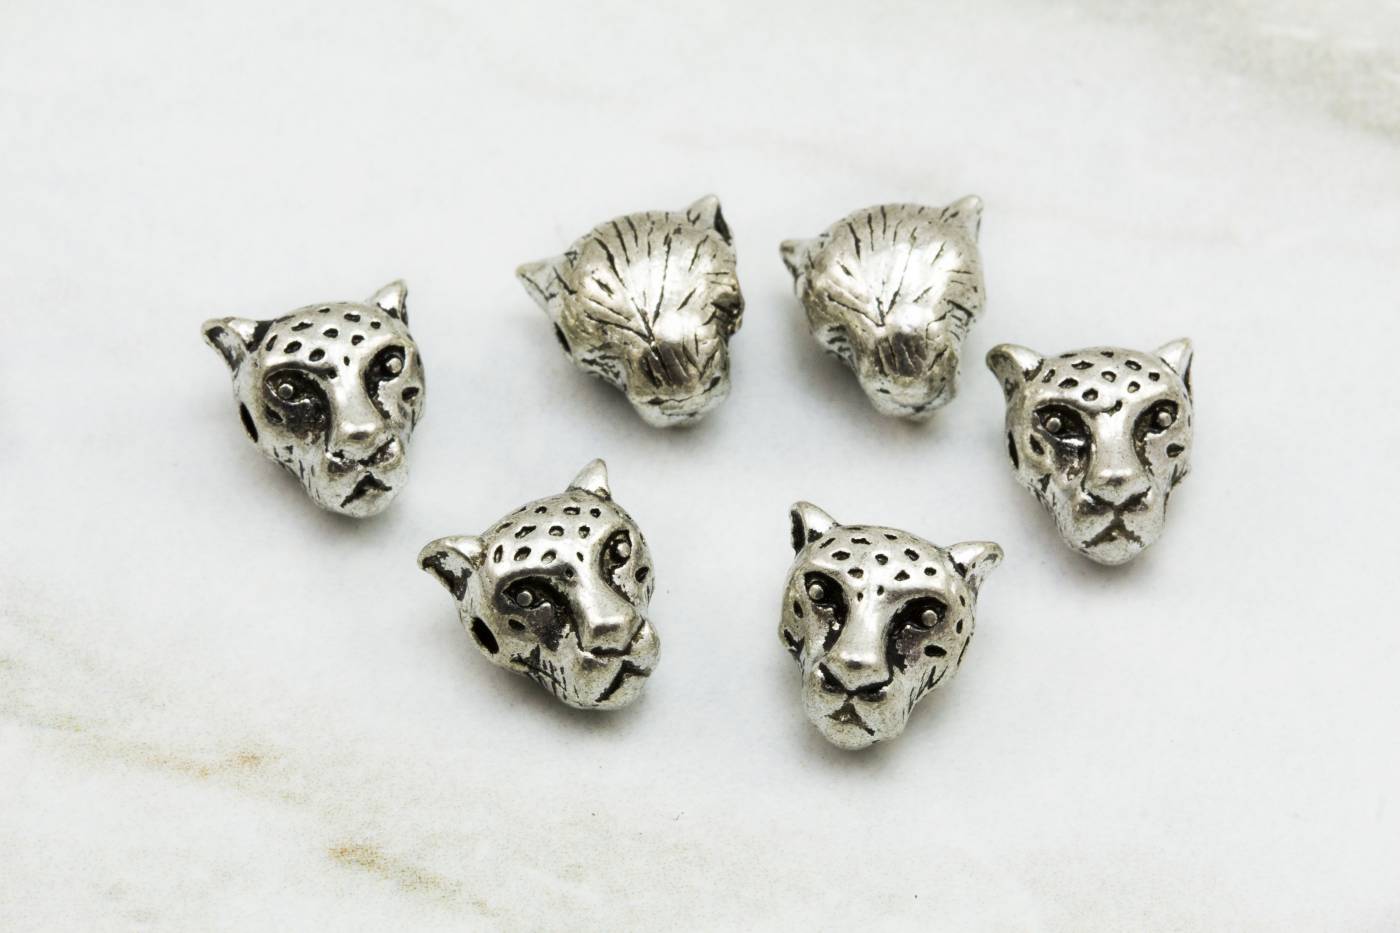 10mm Tiger Head Charms / MB-105 | Charms